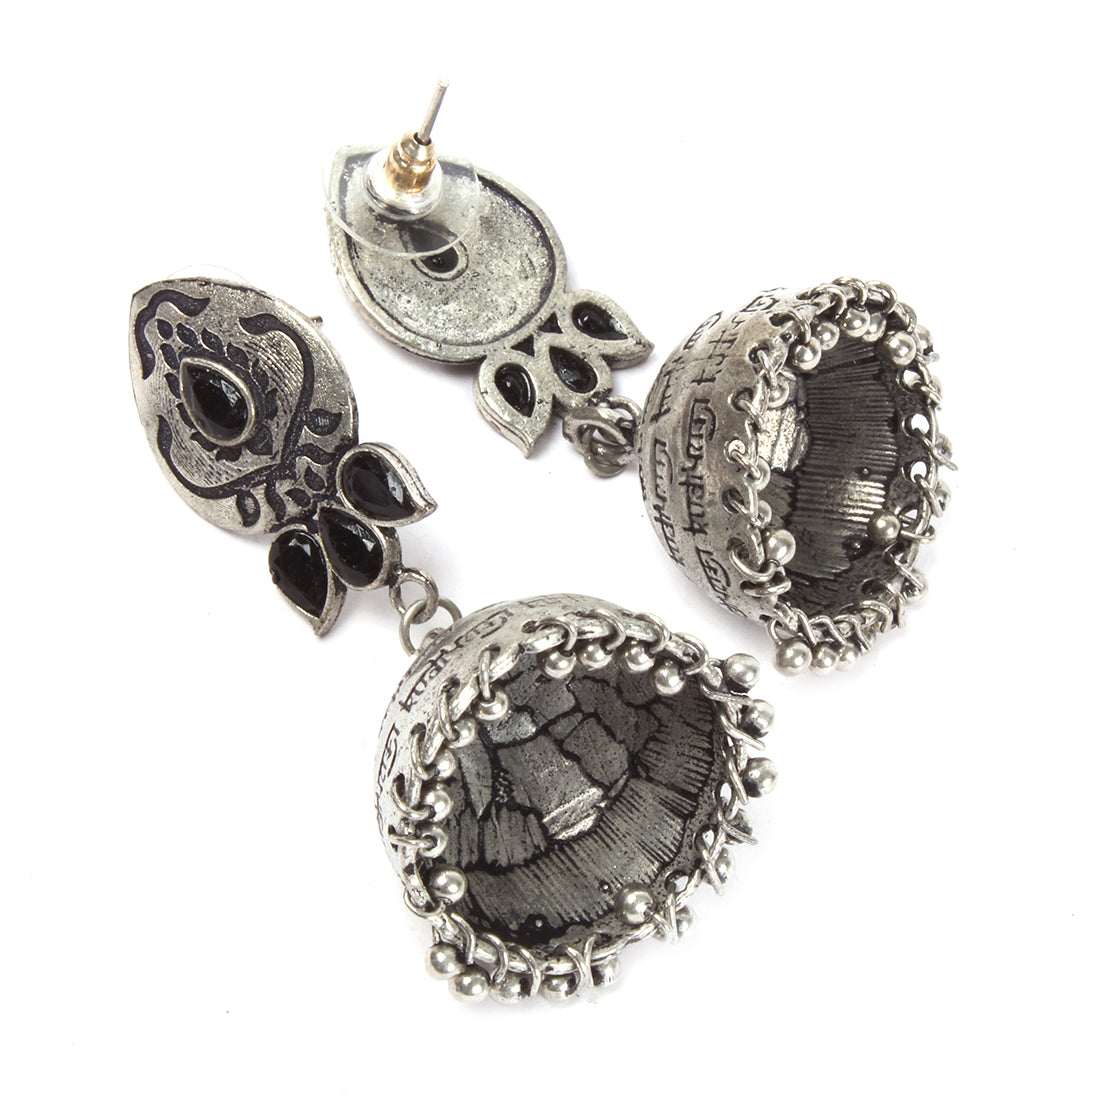 OVERSIZED HANDCRAFTED ETHNIC SILVER-TONED WITH BLACK RHINESTONES GHUNGROO JHUMKA EARRINGS